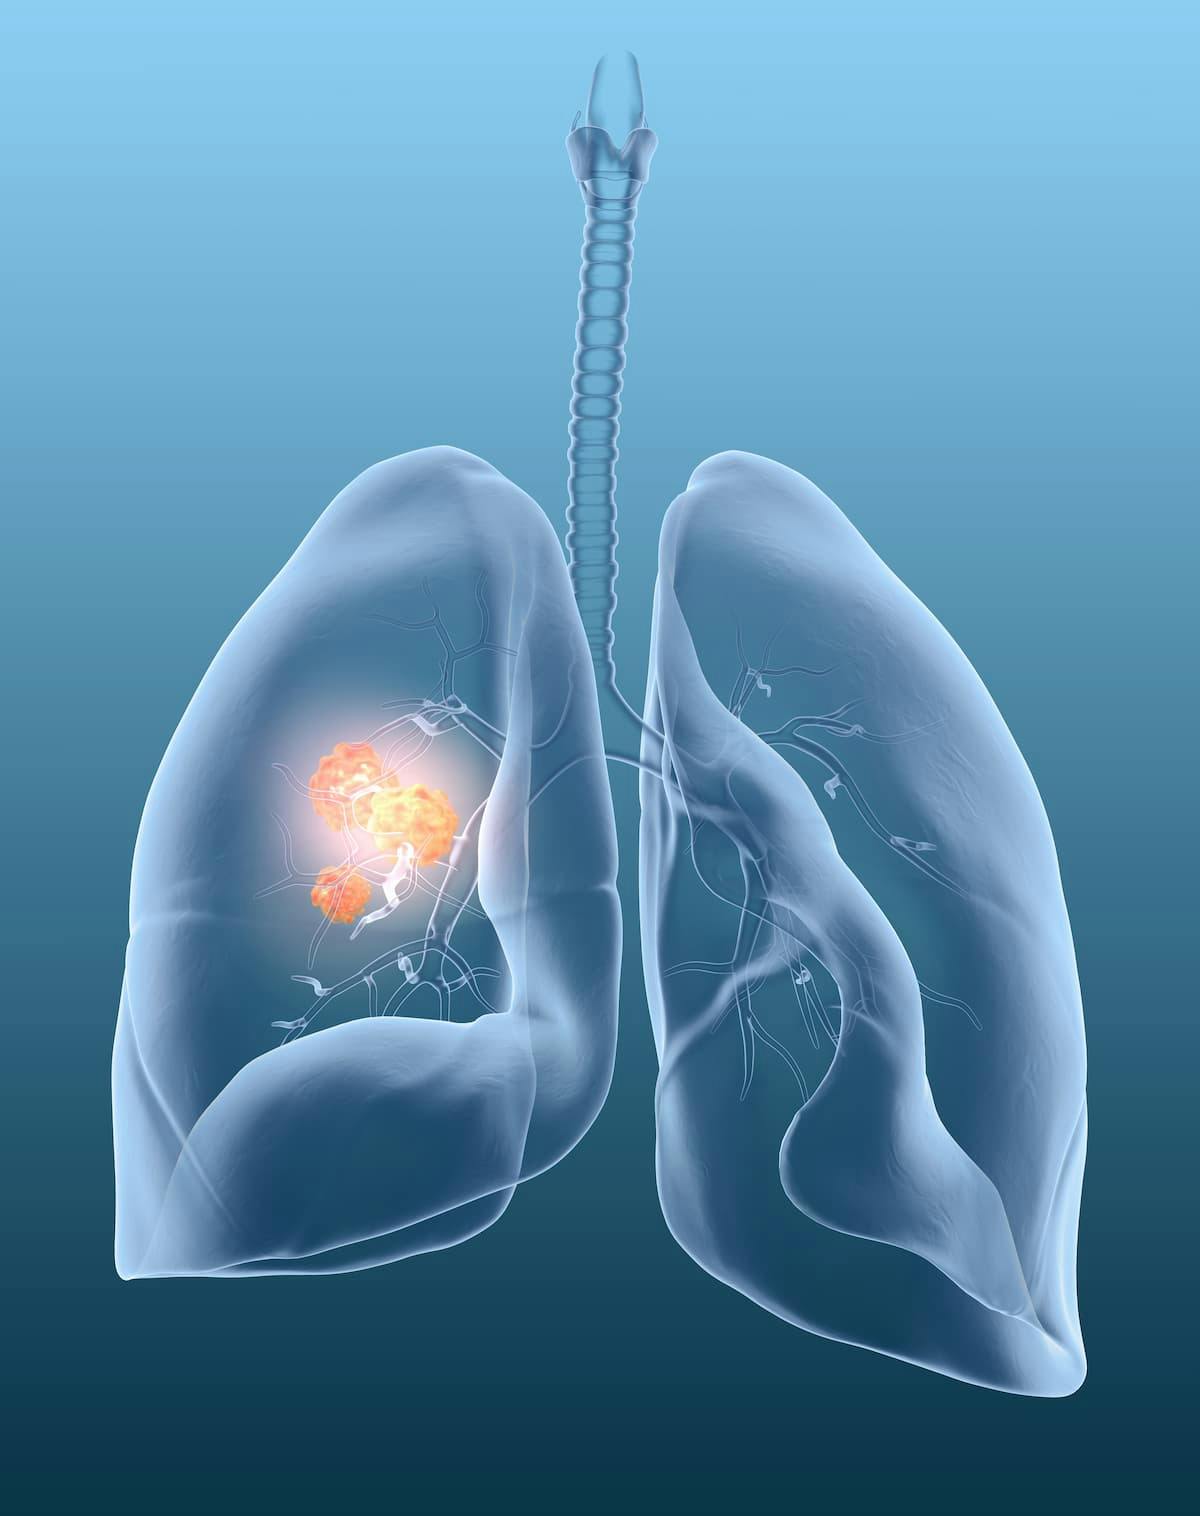 ZENITH20 Trial Has Positive Results In Untreated HER2 Exon 20-Mutant Non-Small Cell Lung Cancer